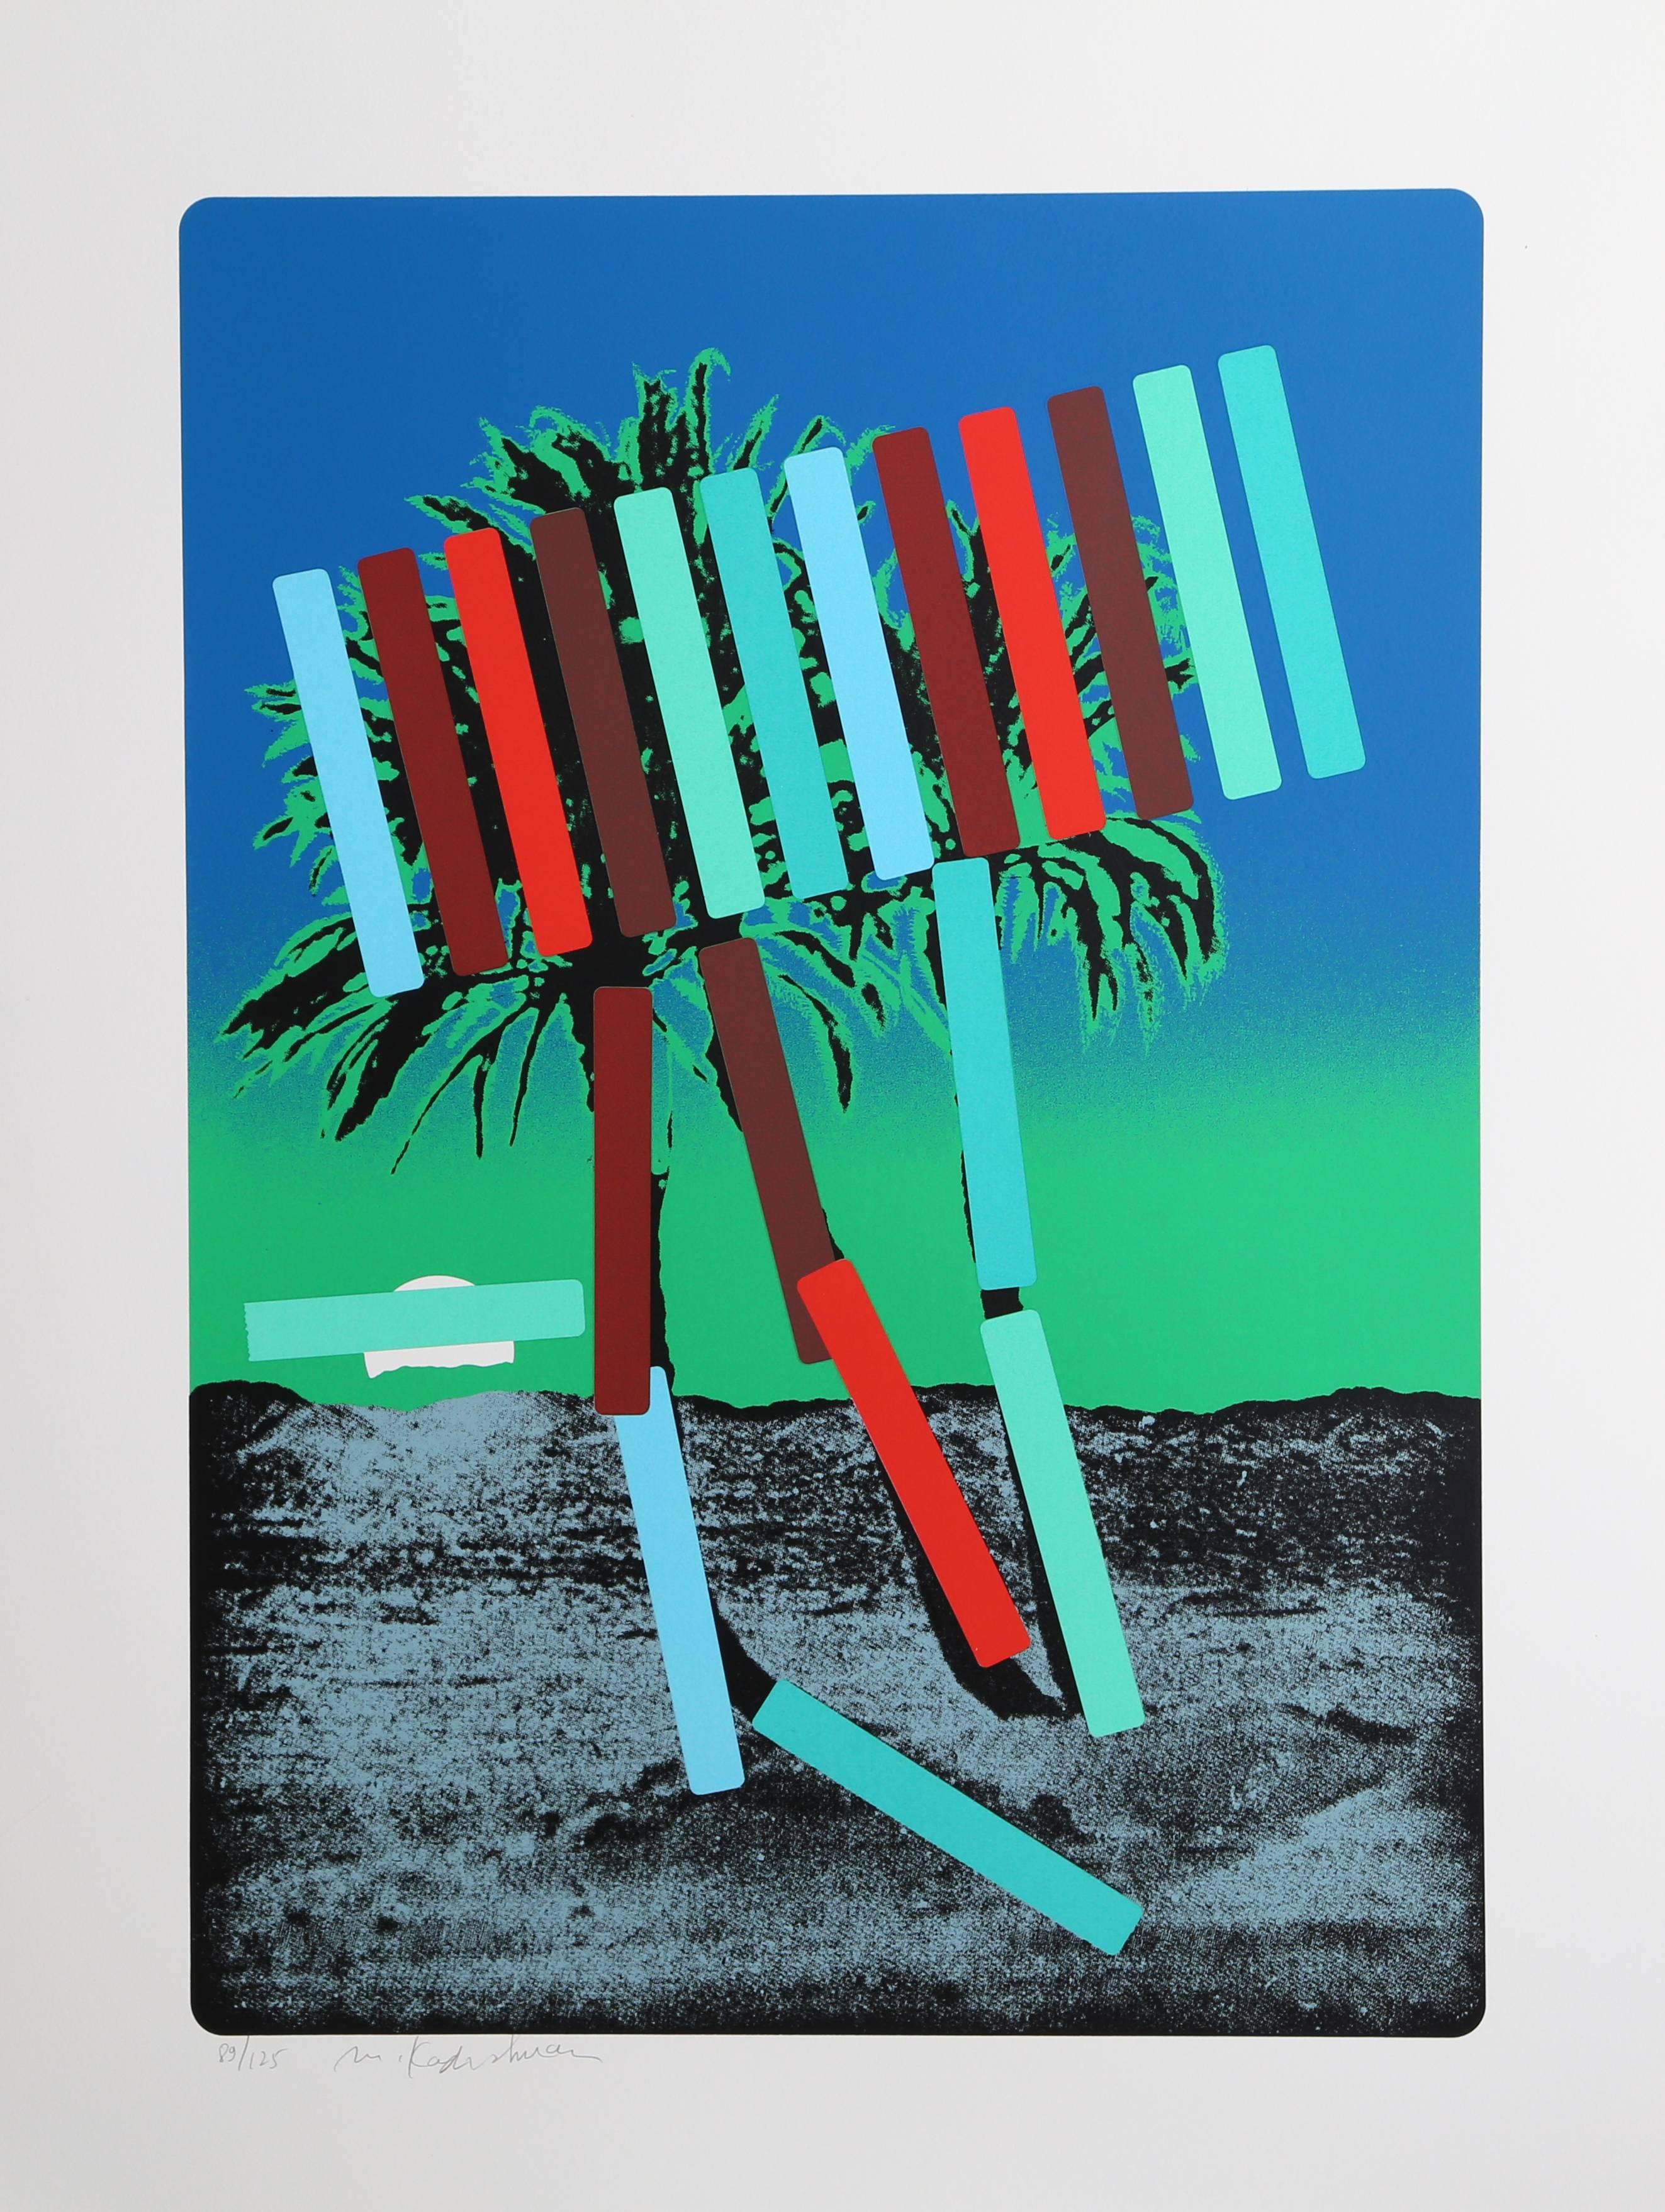 Artist:  Menashe Kadishman, Israeli (1932 - 2015)
Title:  Teal and Red Palm
Year:  circa 1979
Medium:  Serigraph, signed in pencil
Edition:  125, AP
Image Size: 30.5 x 21.5 inches 
Size: 40 x 29.5 in. (101.6 x 74.93 cm)